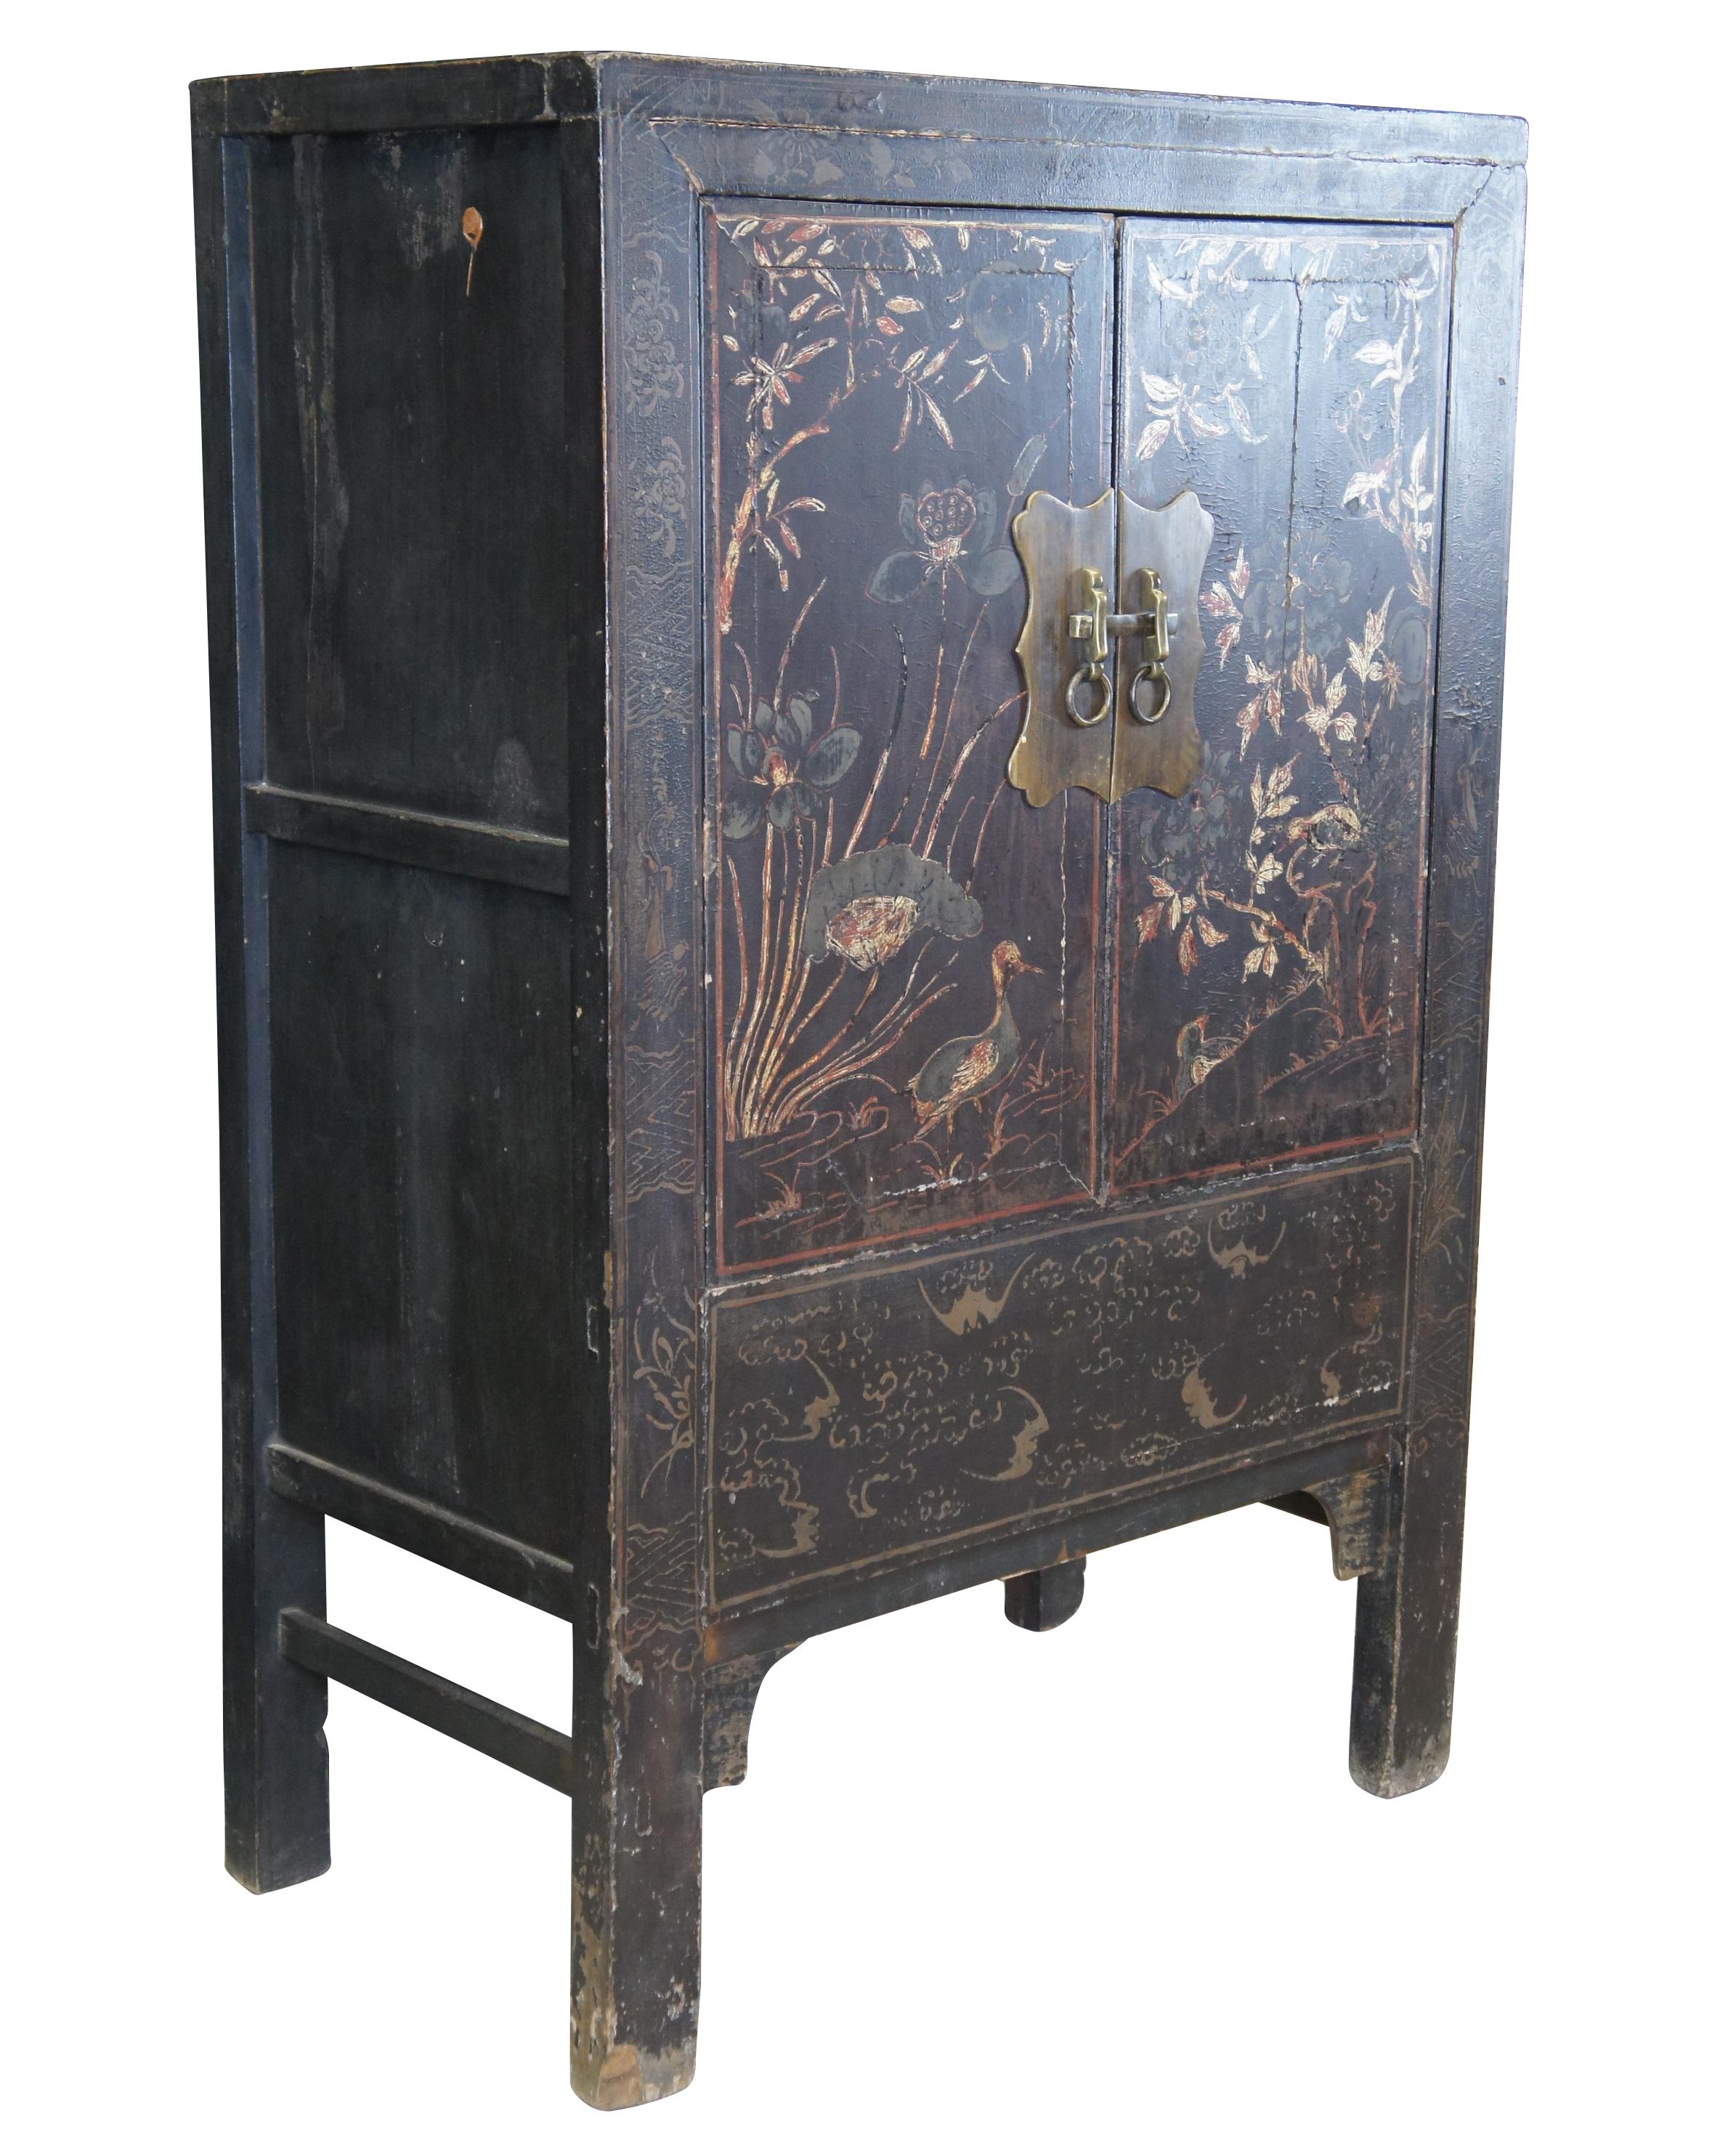 A quaint 20th century chinoiserie Ming style lacquered wardrobe / tv cabinet. Features a beautiful hand painted scene along the front with two ducks amidst a flowery meadow. The hardware is brass with knocker pulls. Interior has two shelves. A